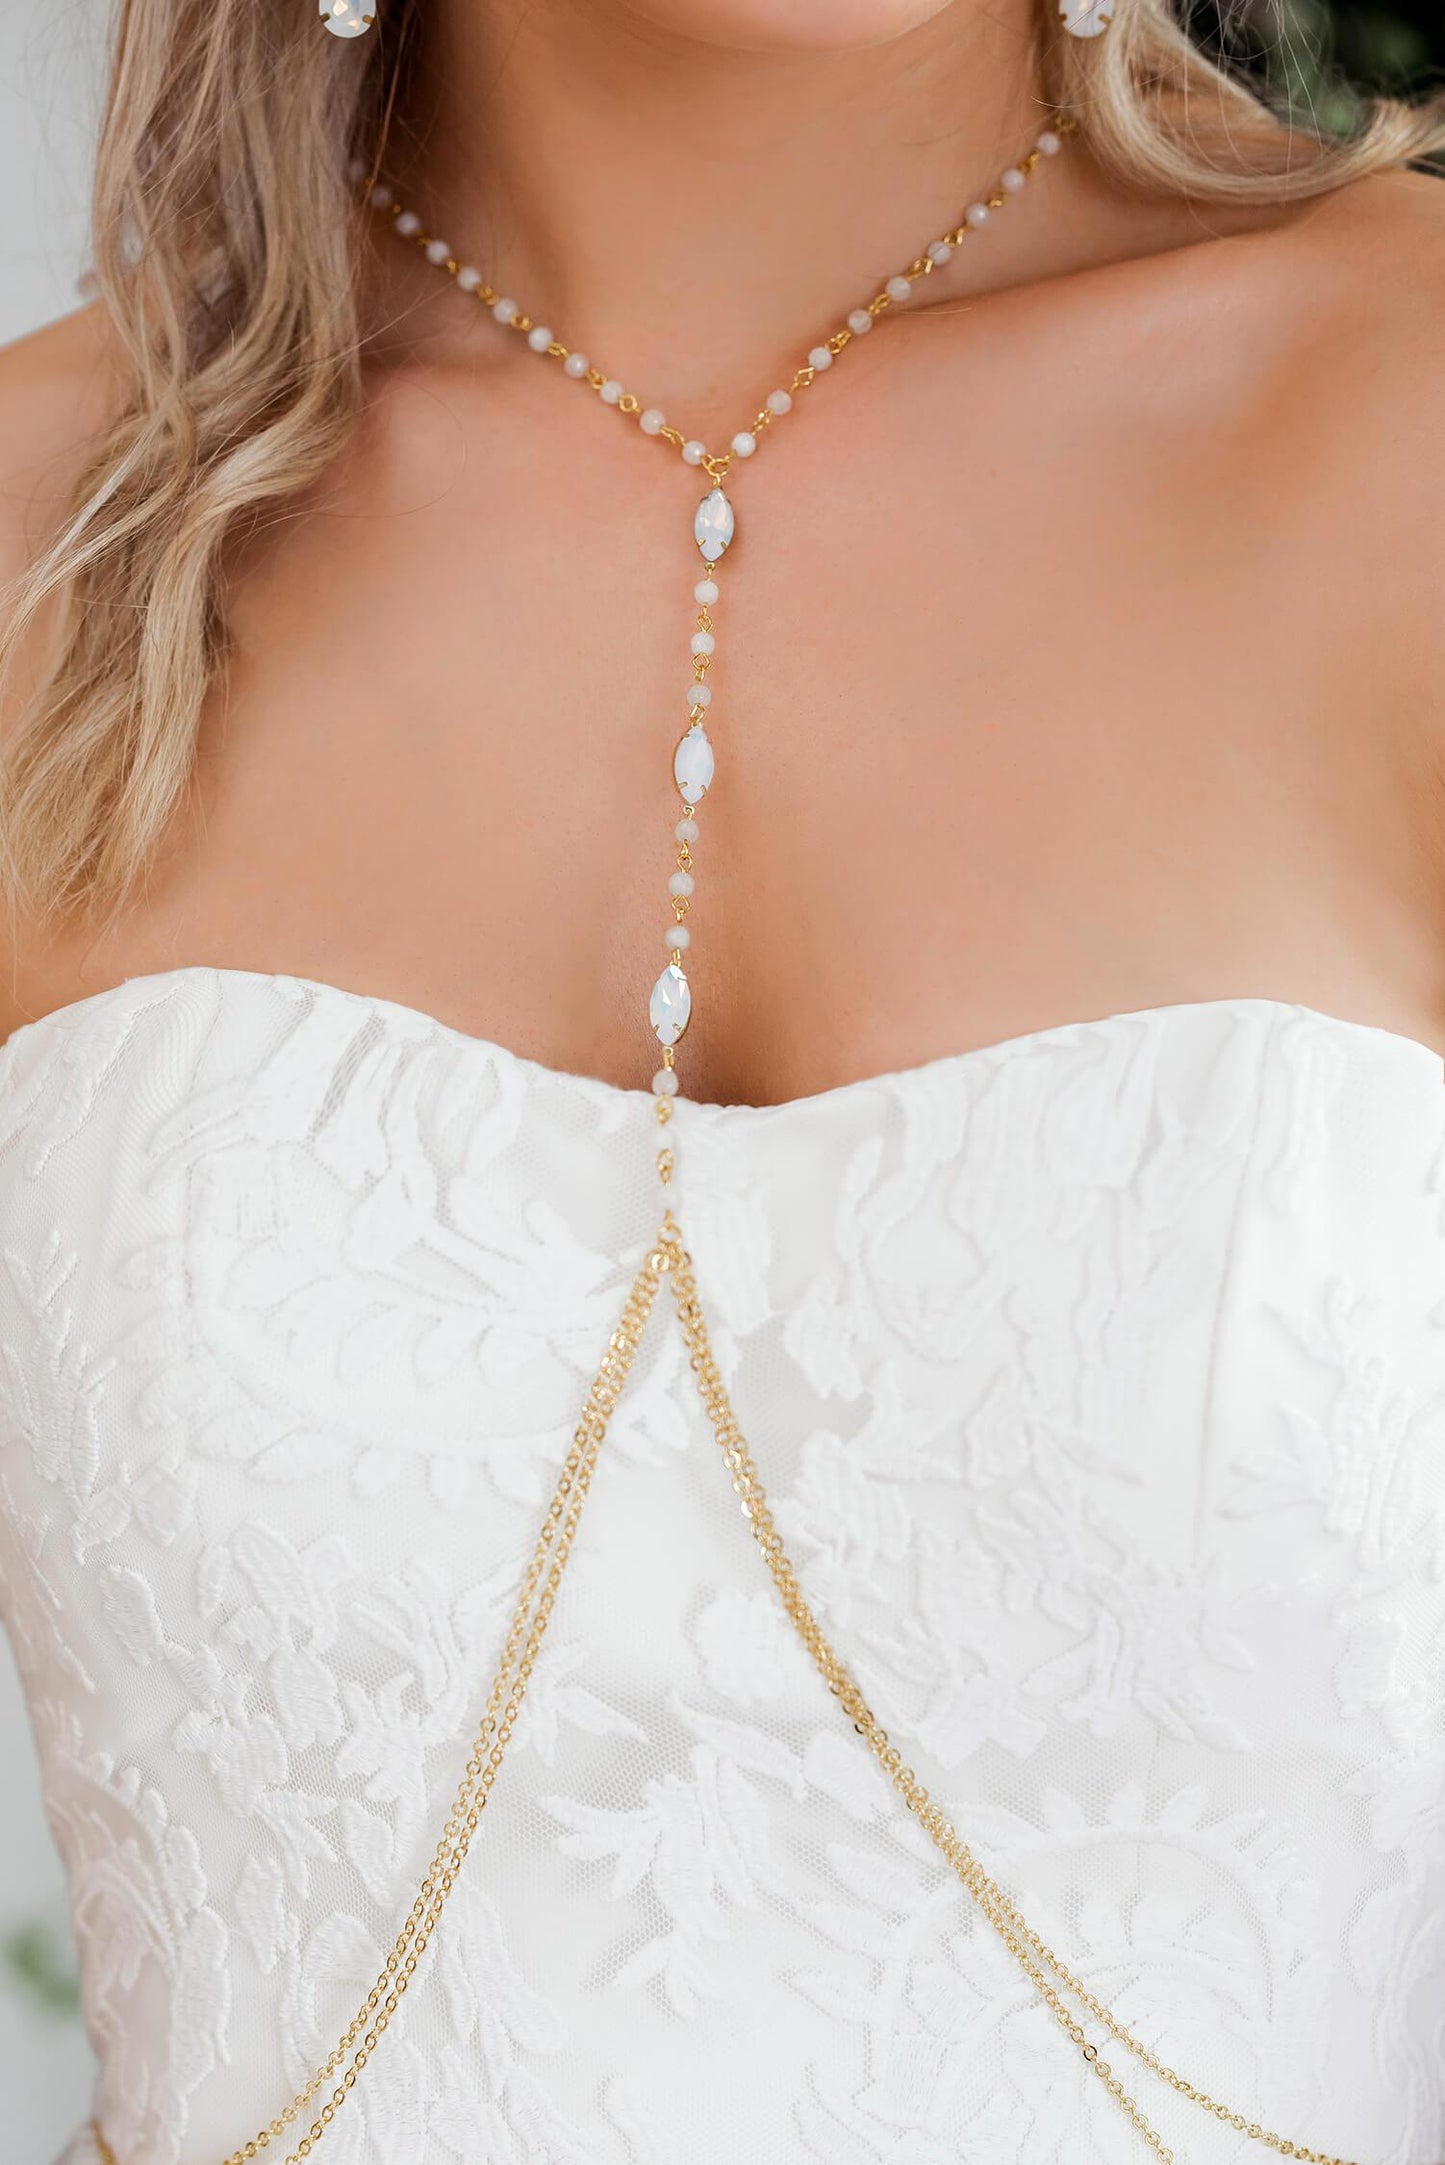 Gold Tallulah Body Chain Harness Necklace from side